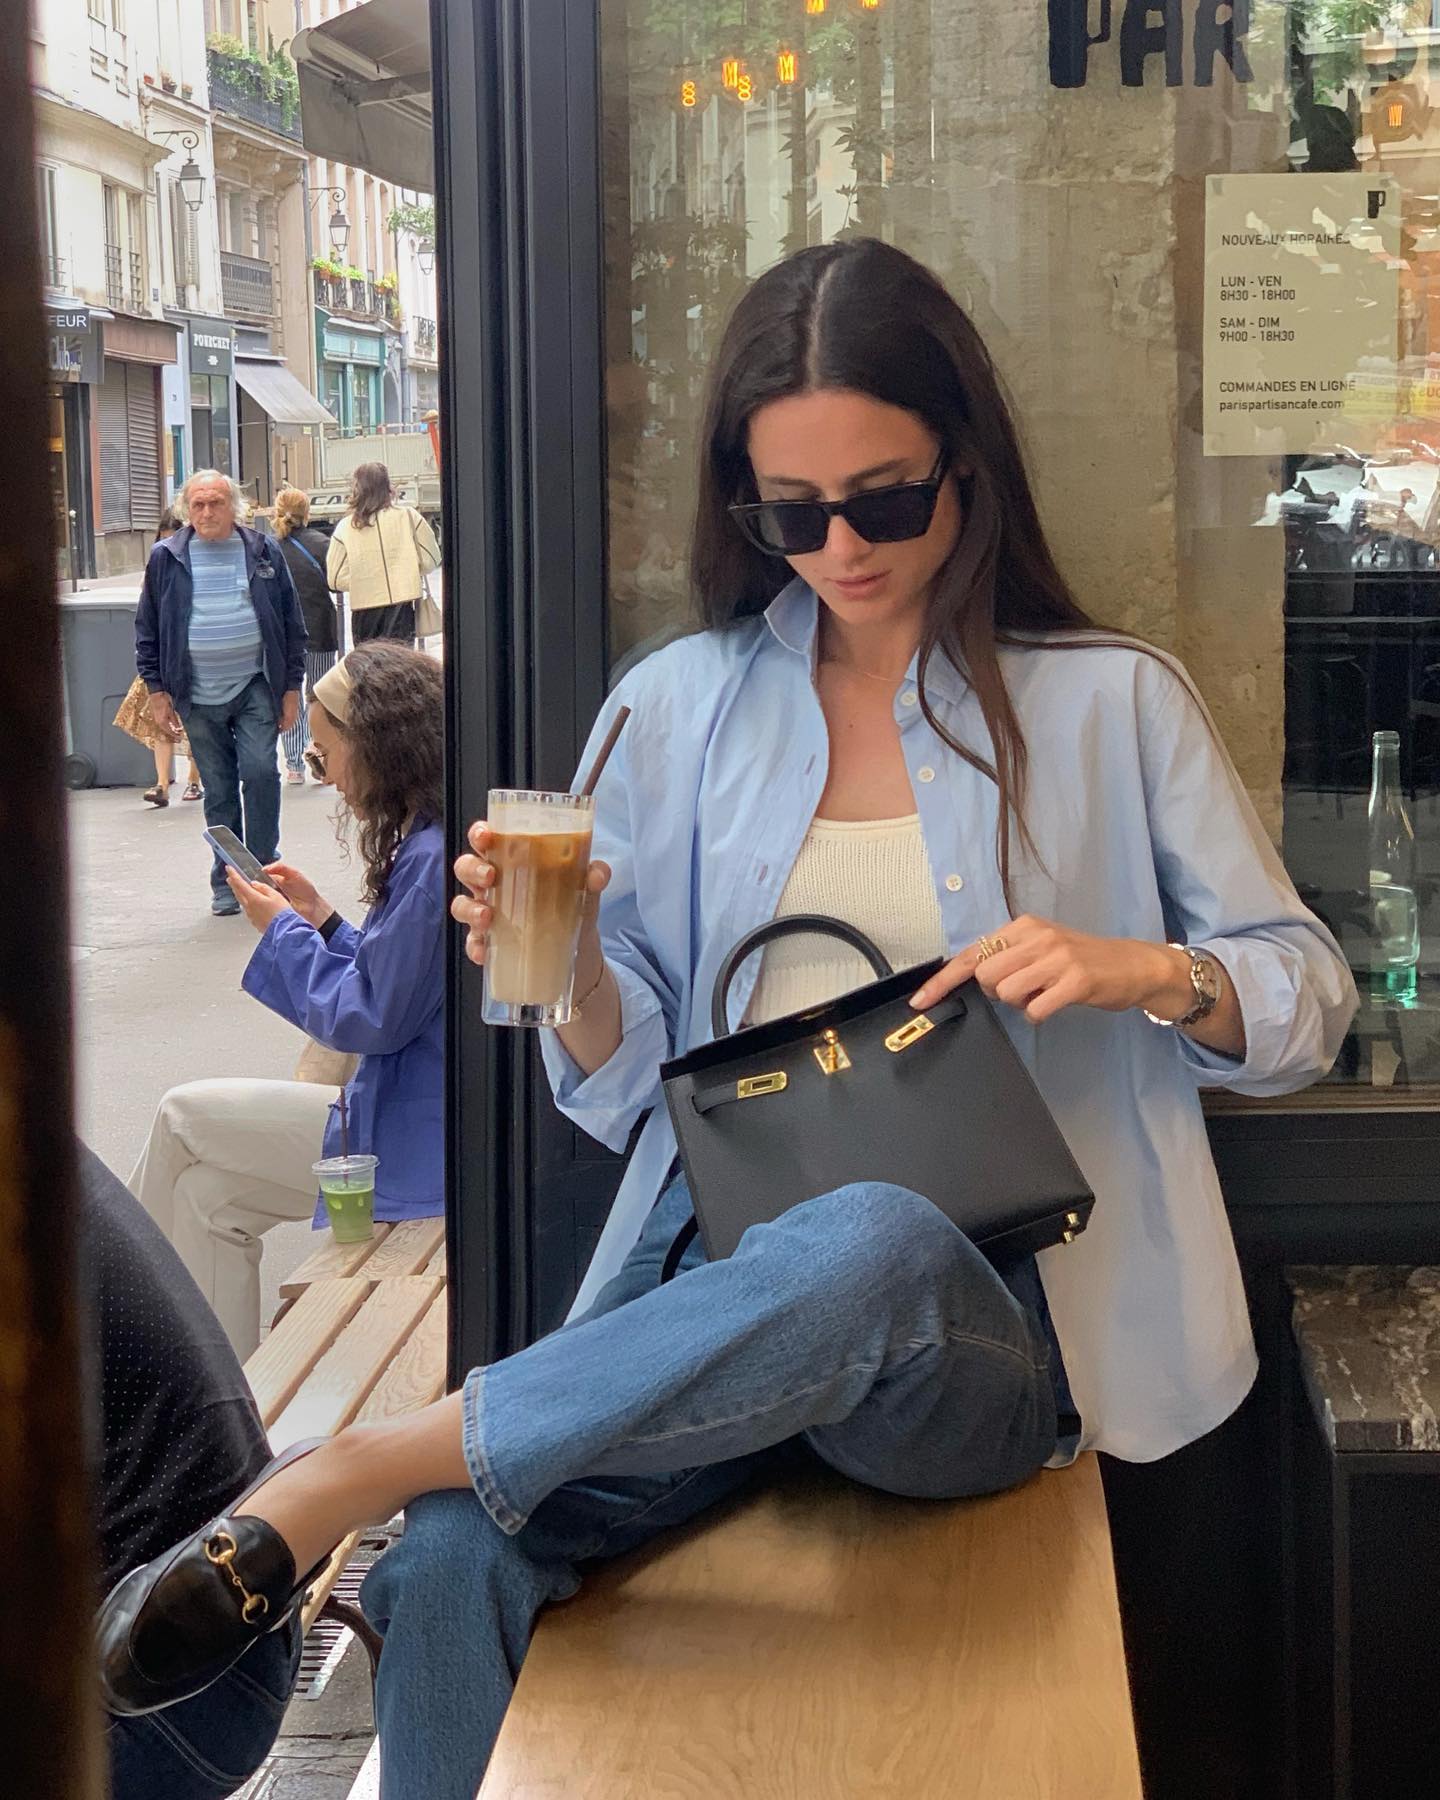 French fashion influencer sits in a café with an iced coffee wearing a blue button-down shirt, white top, Hermes bag, jeans, and Gucci loafers